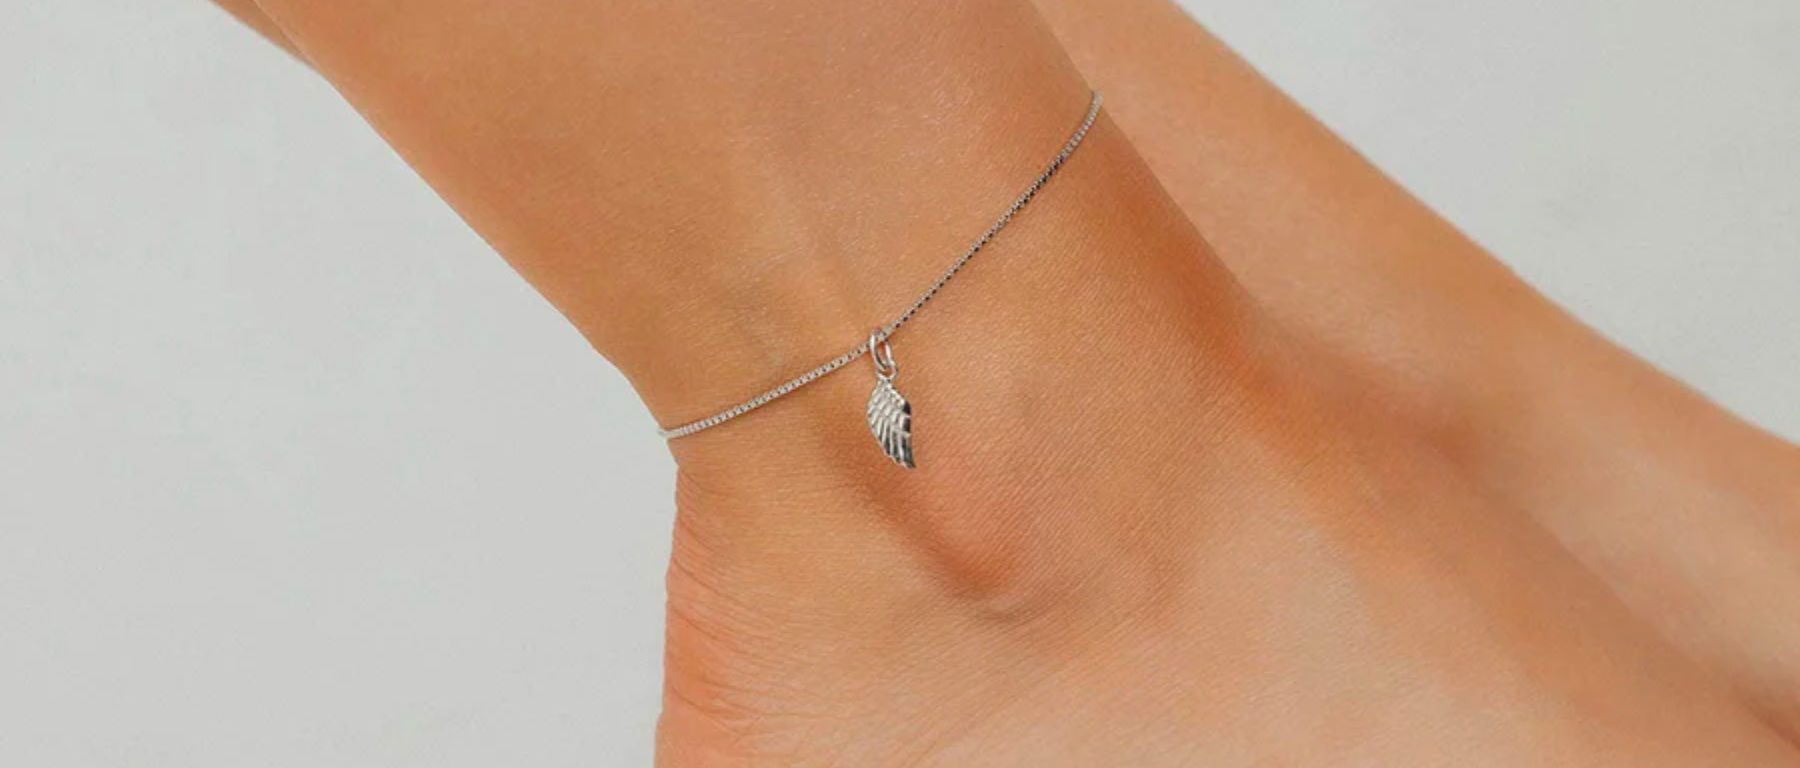 ROMA ANGEL WING CHARM ADJUSTABLE ANKLET